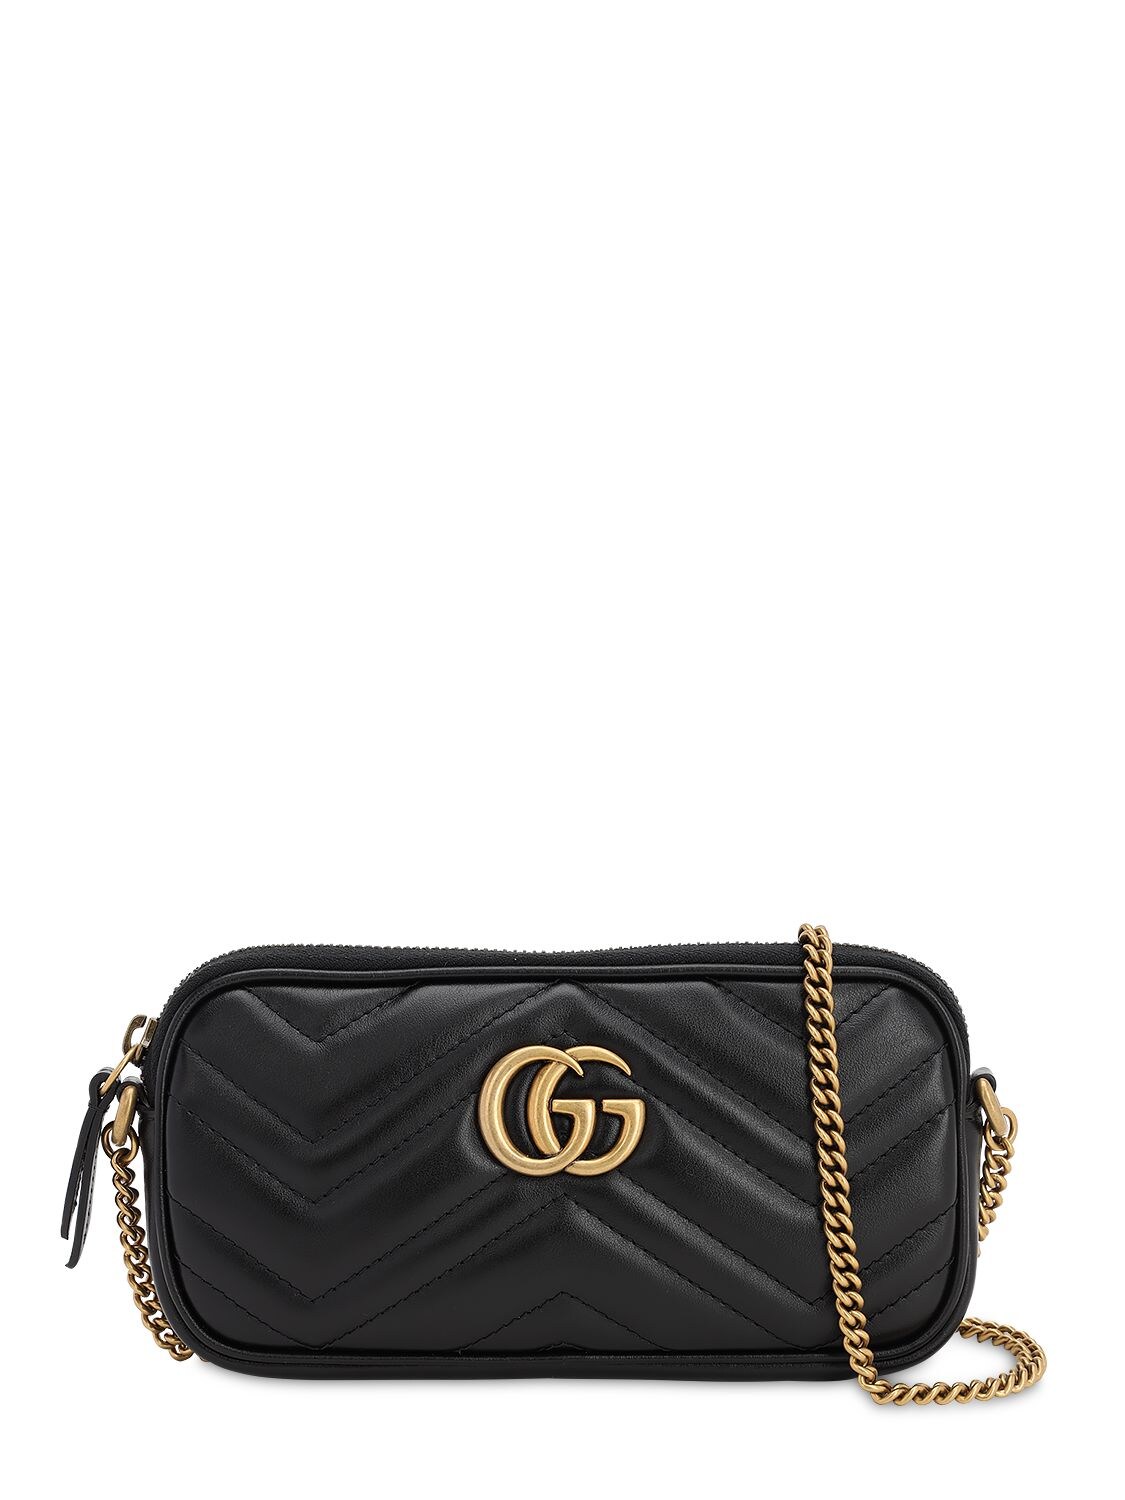 Gucci Gg Marmont 2.0 Leather Shoulder Bag In Nero